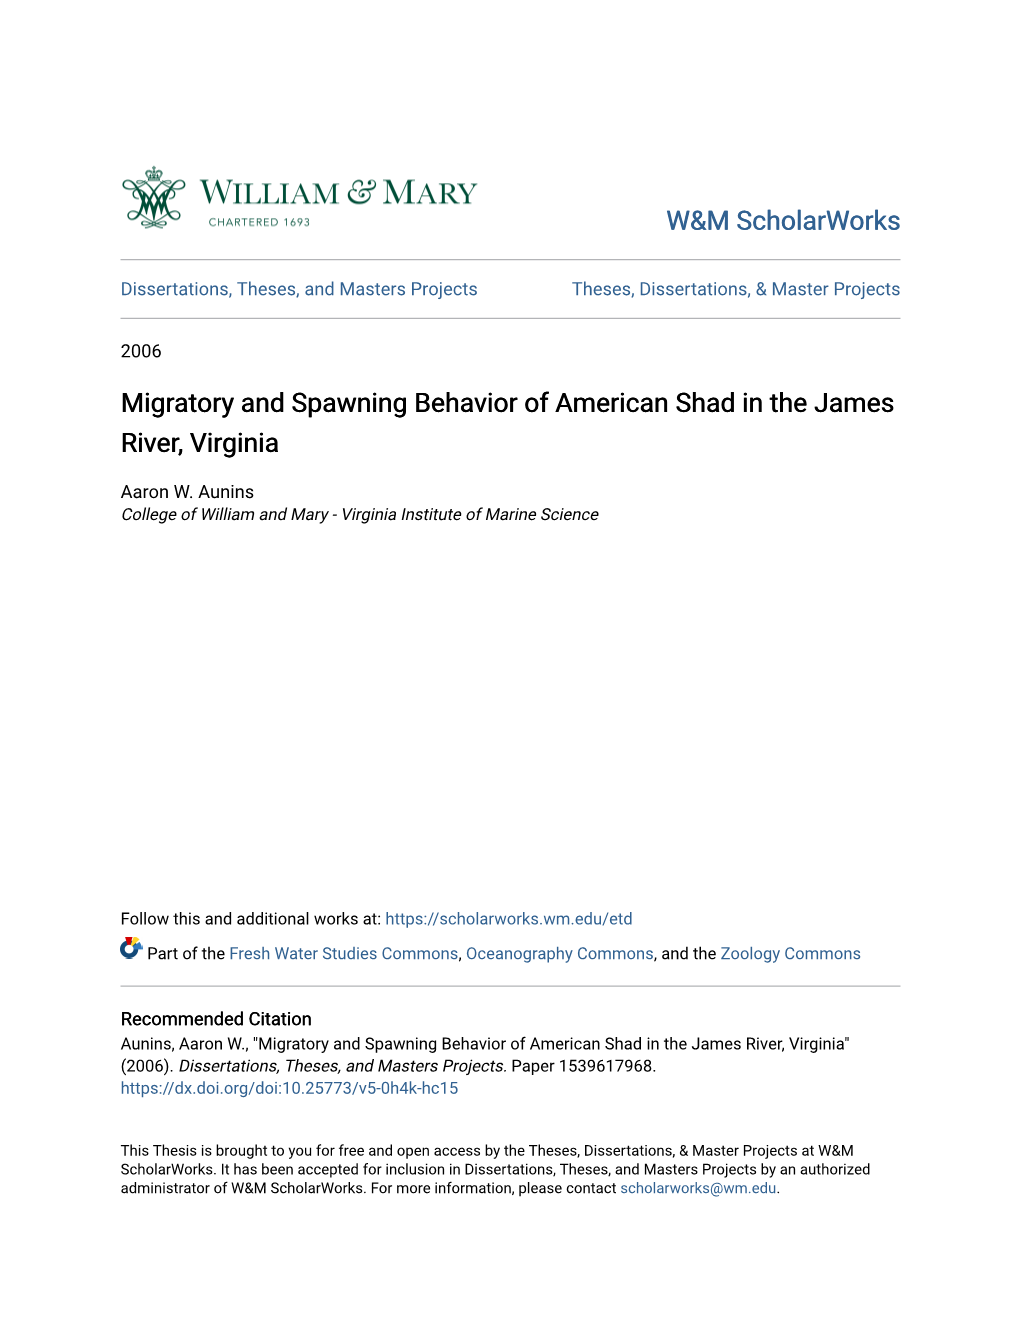 Migratory and Spawning Behavior of American Shad in the James River, Virginia